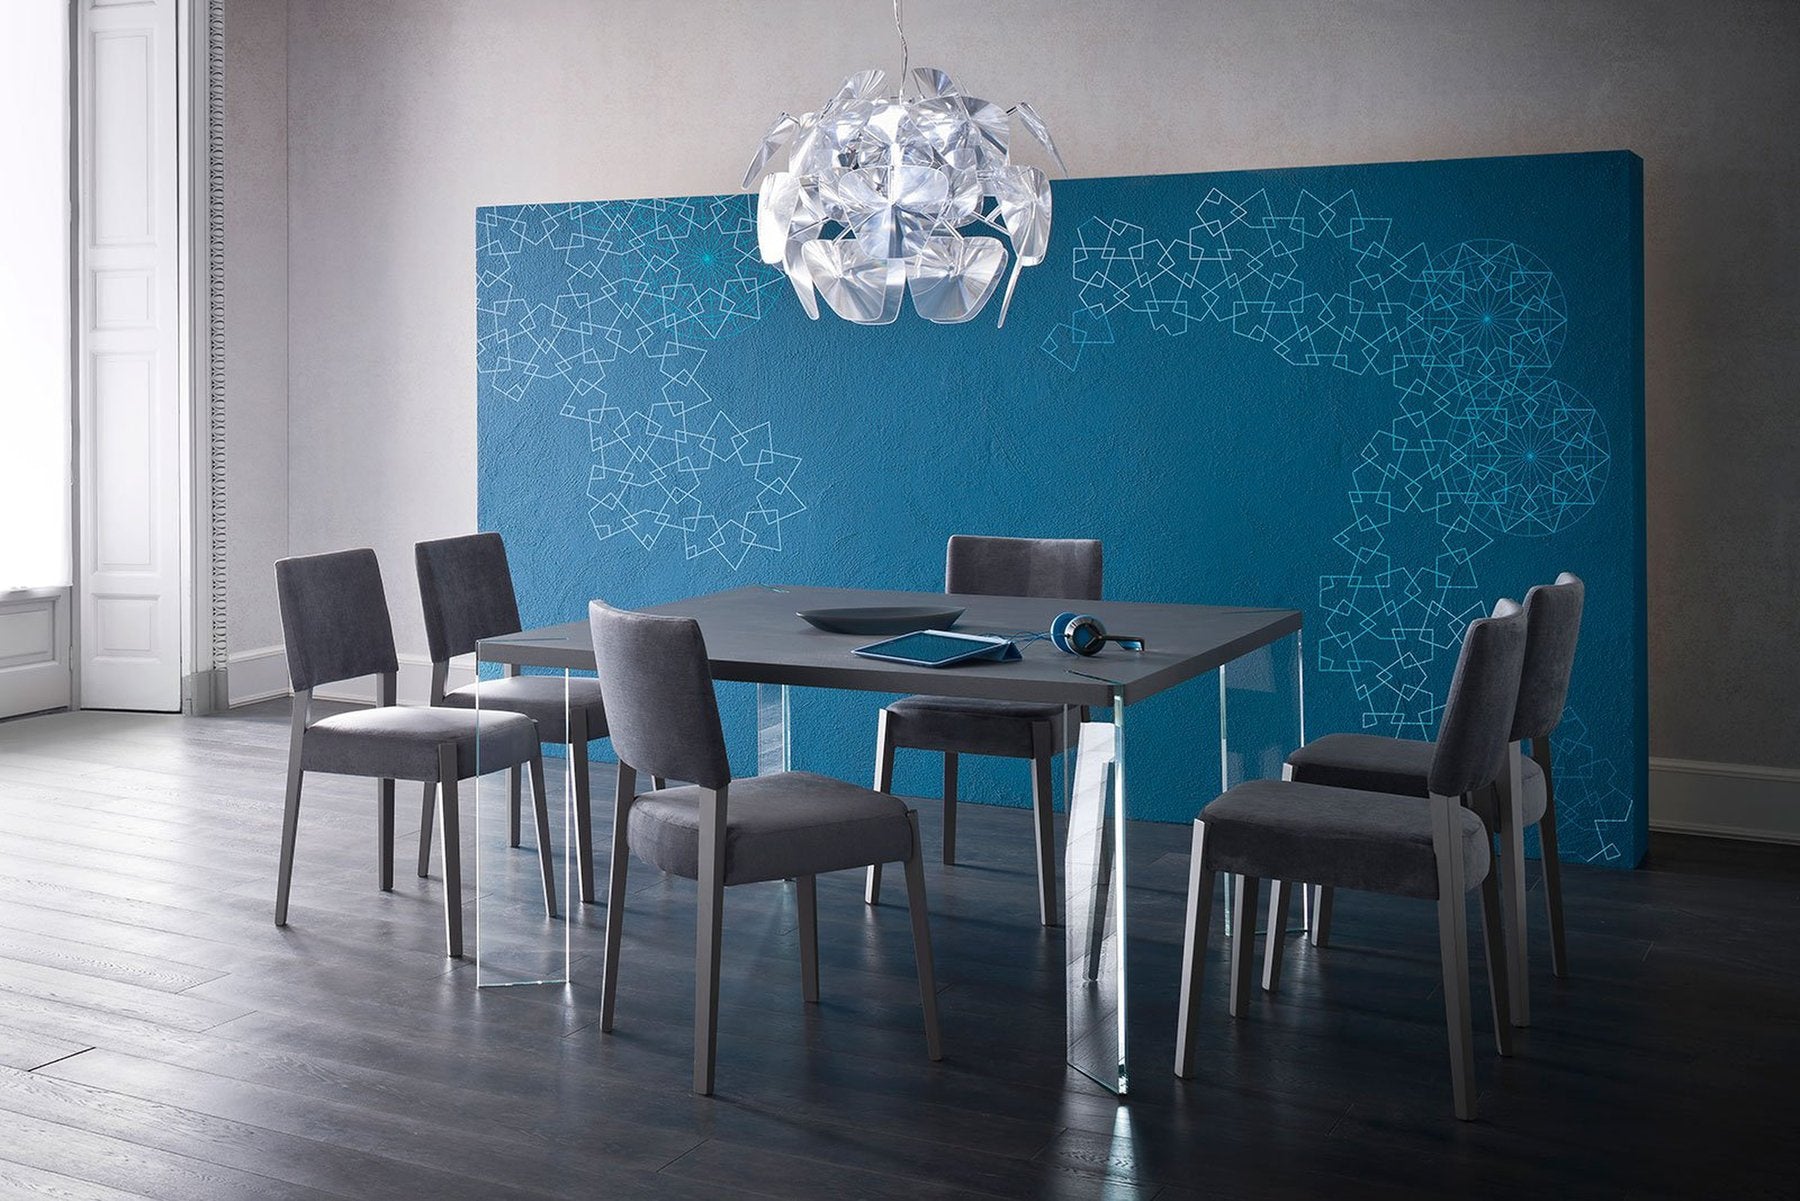 Shop Modern Dining Tables - Upgrade Your Home Decor Today!